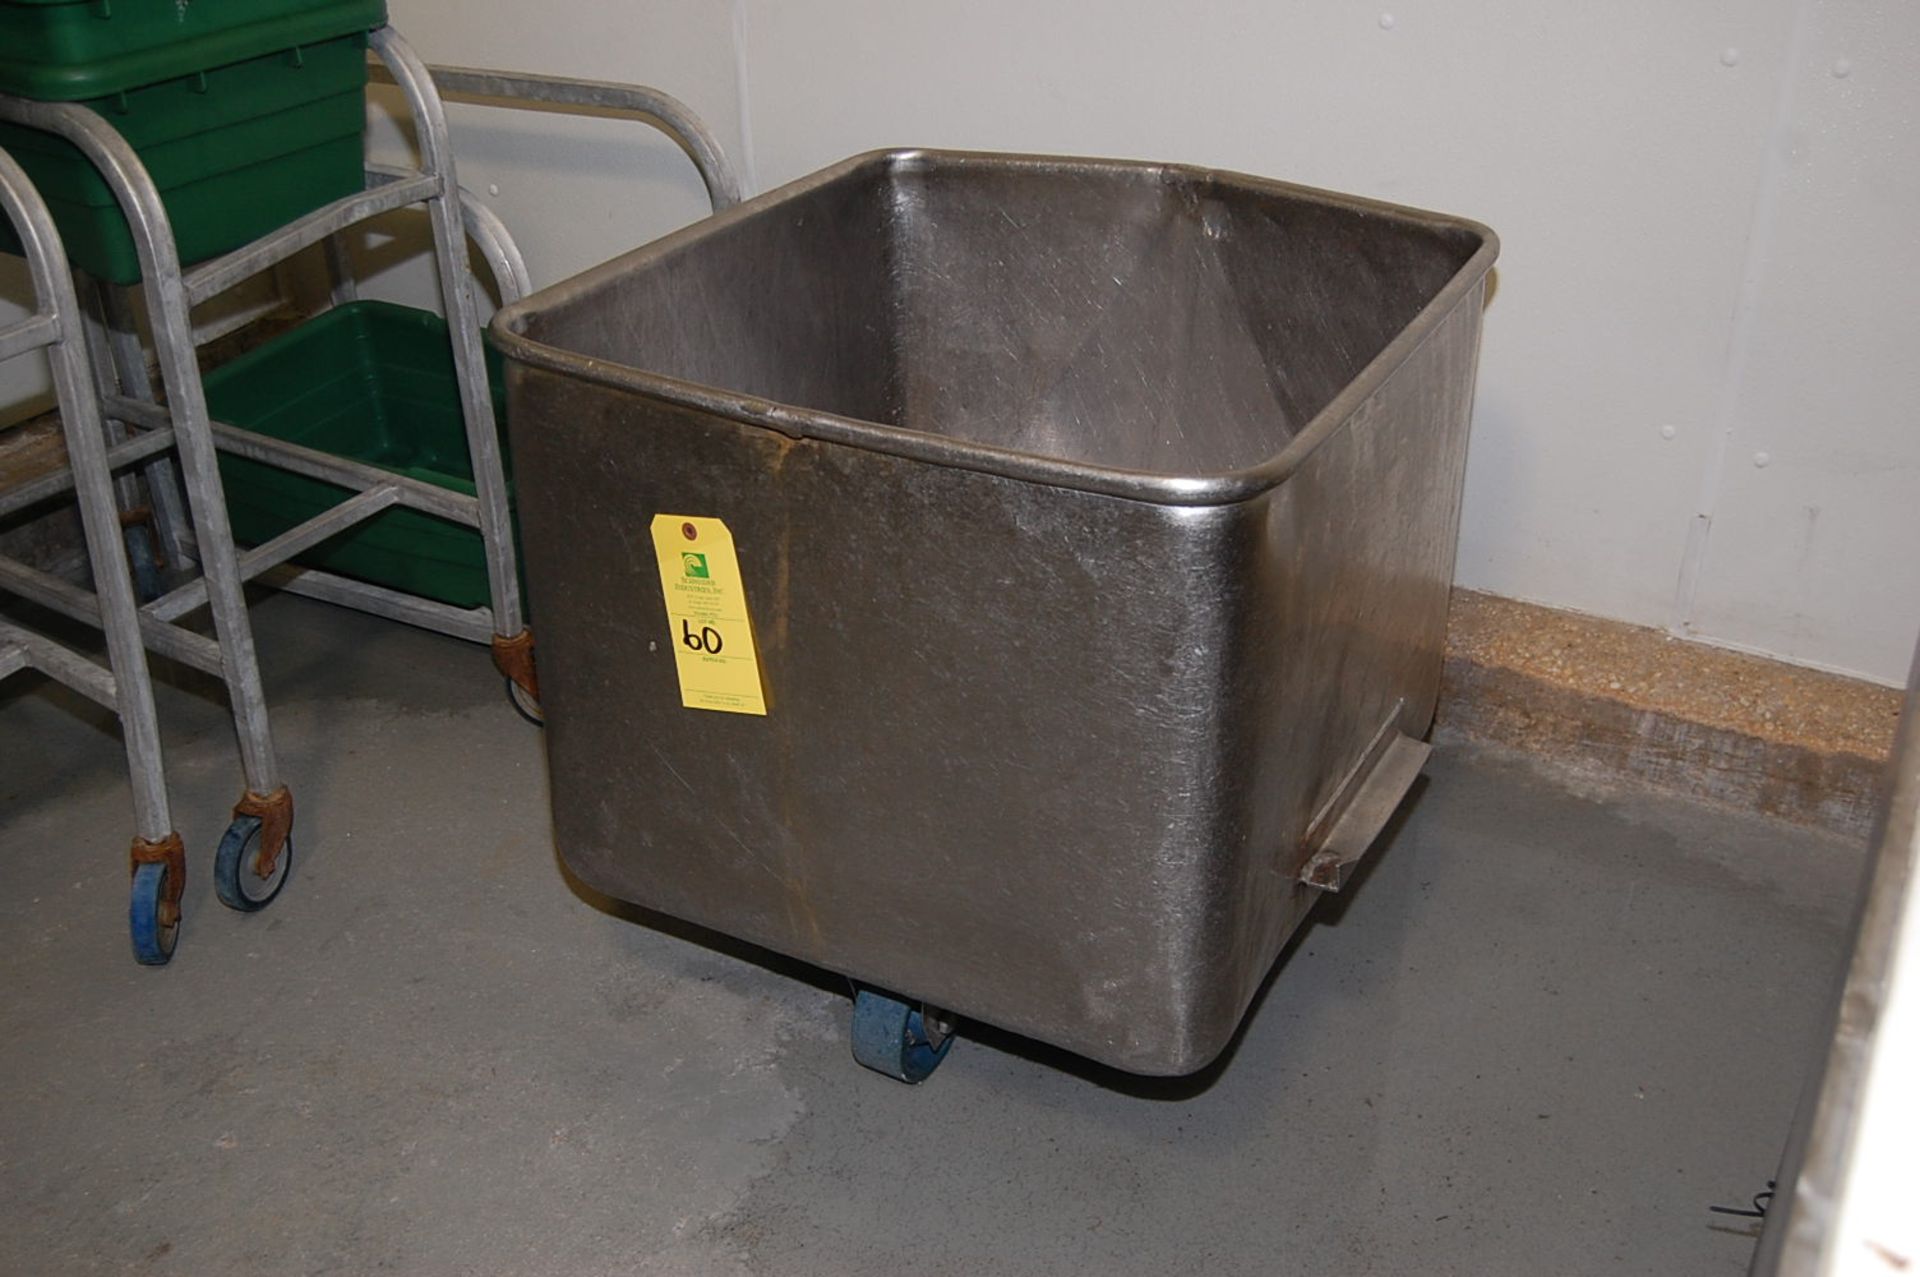 Stainless Steel Tub, 24 in. x 24 in. x 20 in. Mounted on 4-Wheel Base, RIGGING FEE: $25